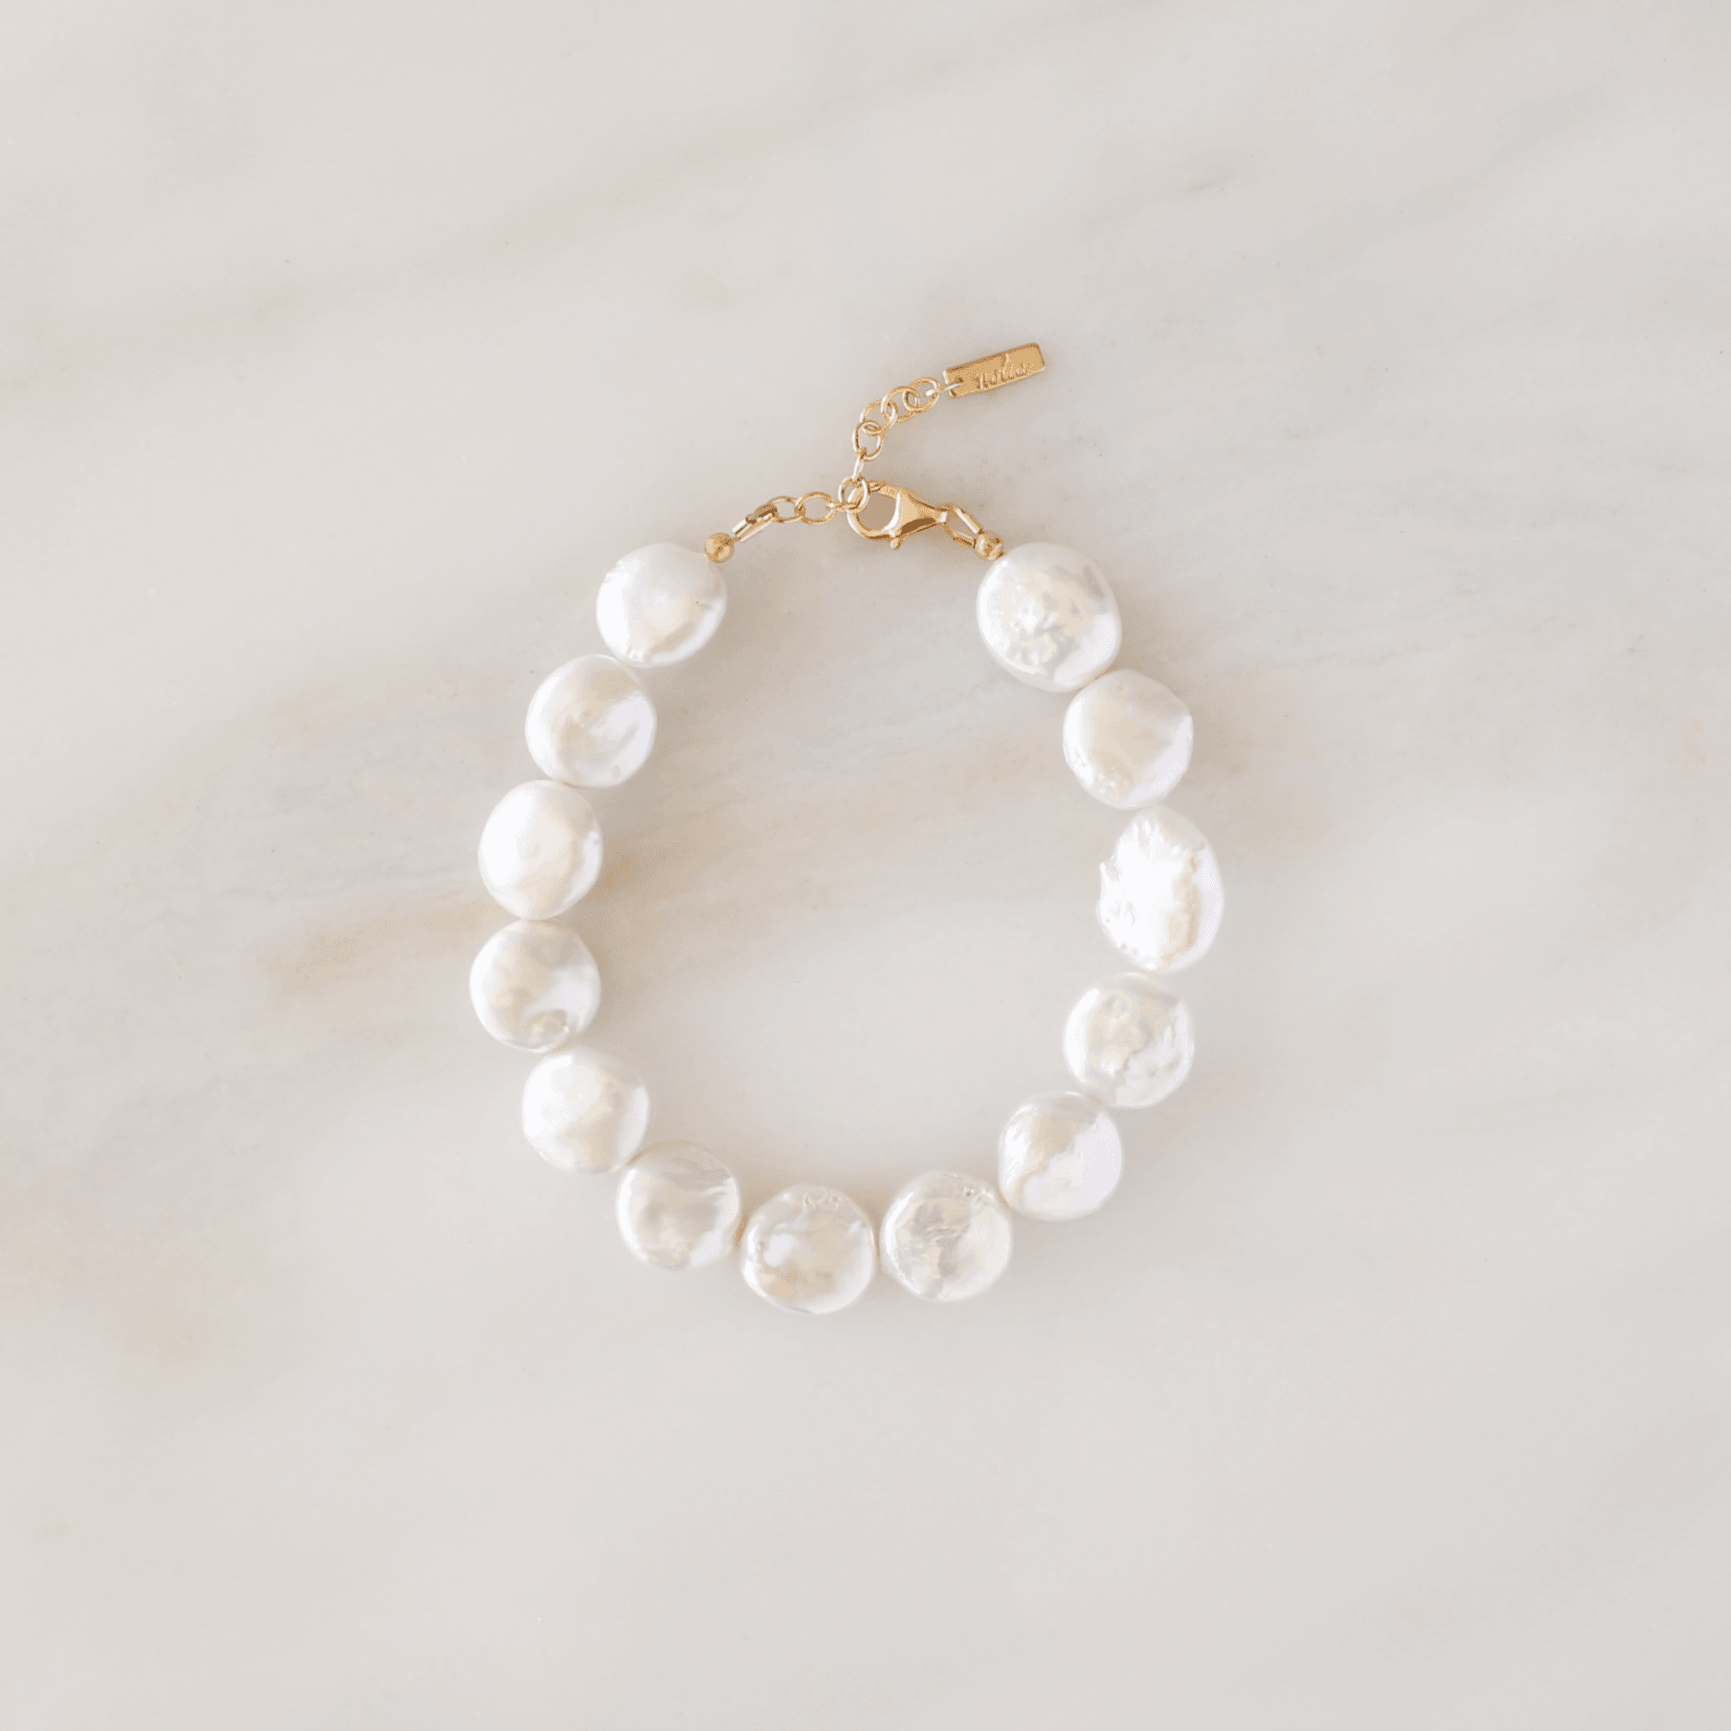 Baroque Misfit Pearl Bracelet - Nolia Jewelry - Meaningful + Sustainably Handcrafted Jewelry